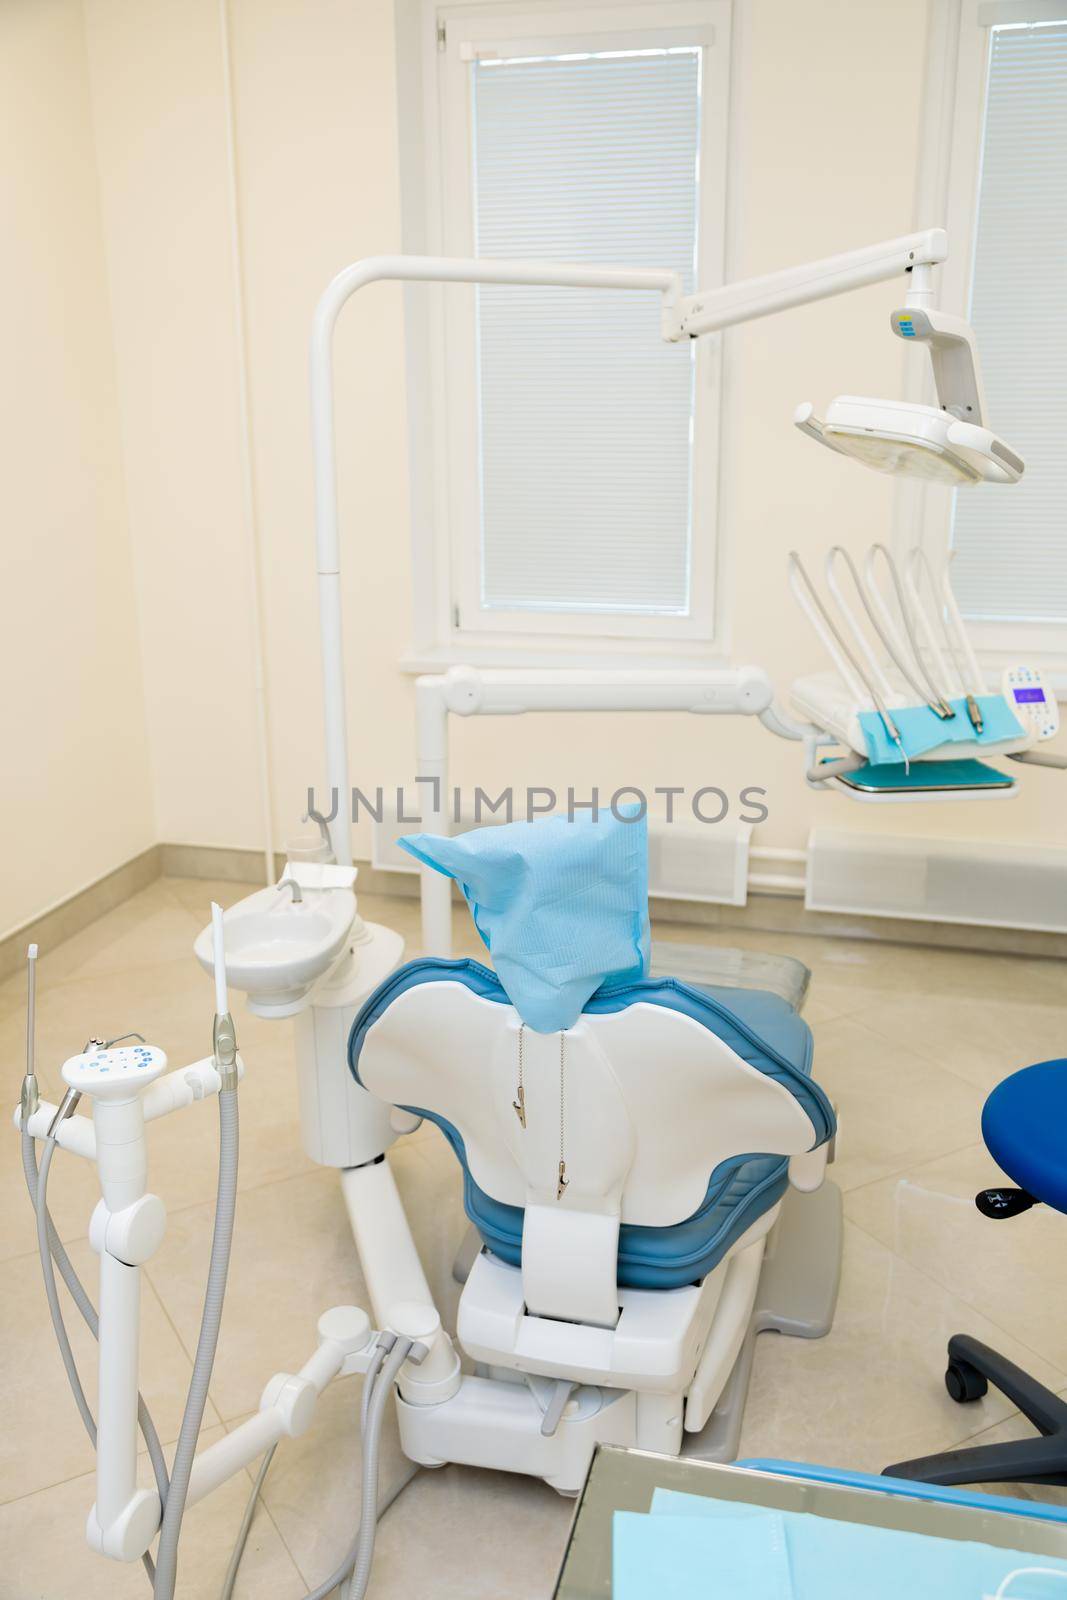 Medical equipment and devices in the dental office. by Yurich32